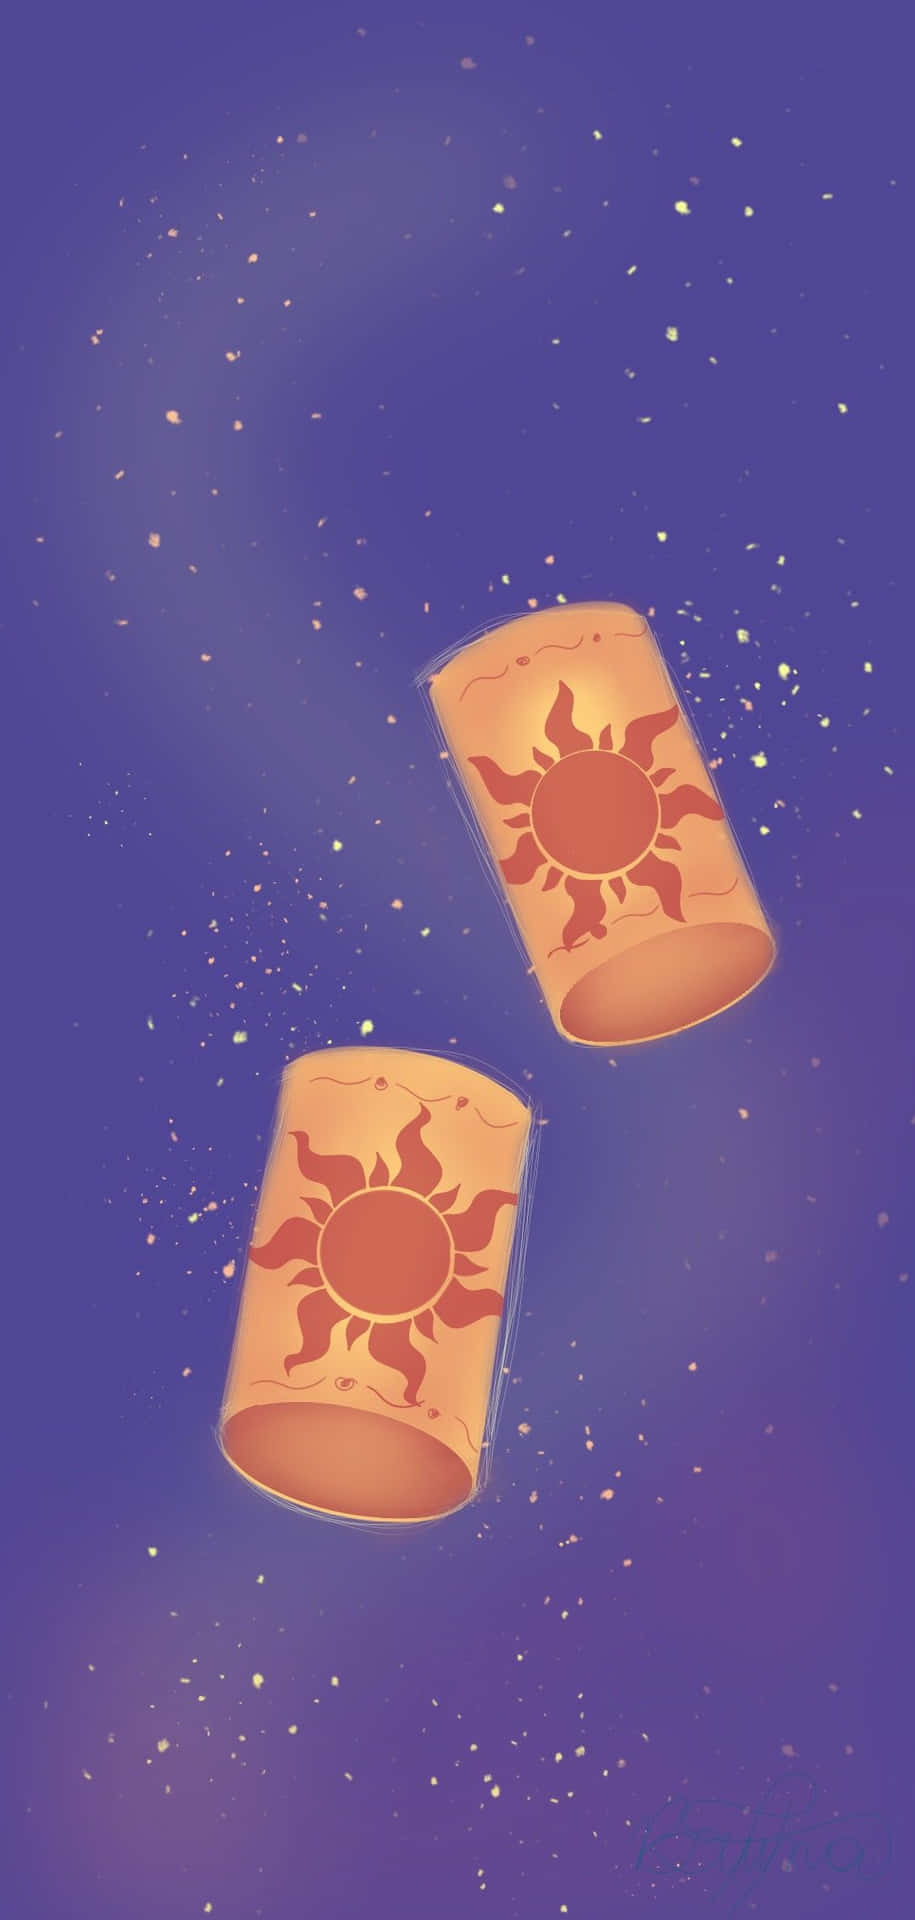 Two Lanterns Flying In The Sky Background